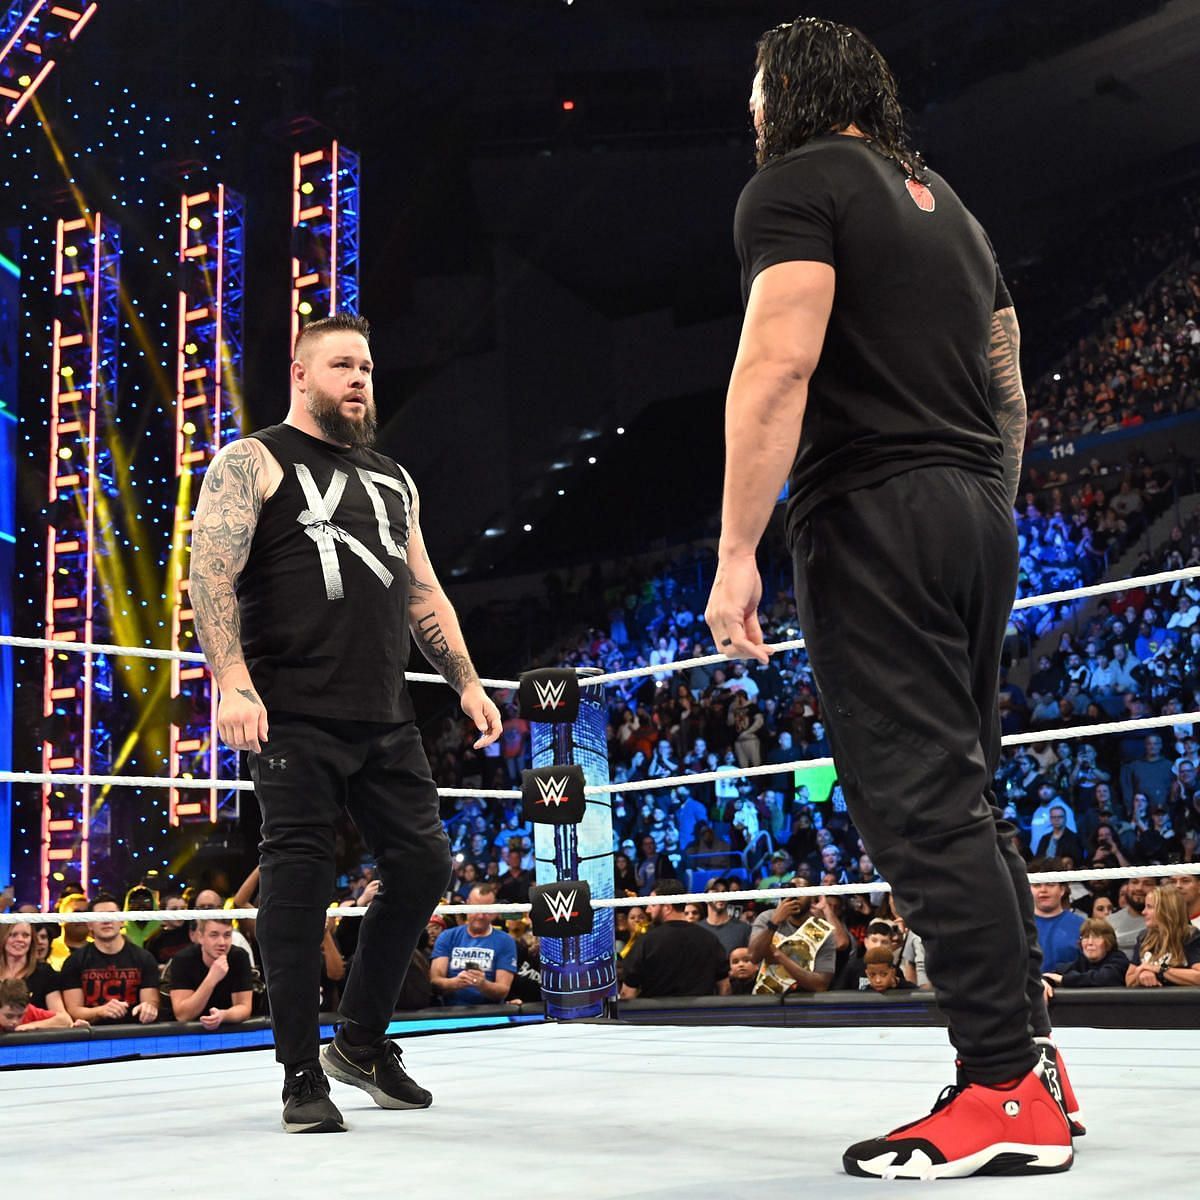 Kevin Owens has a bone to pick with Roman Reigns.